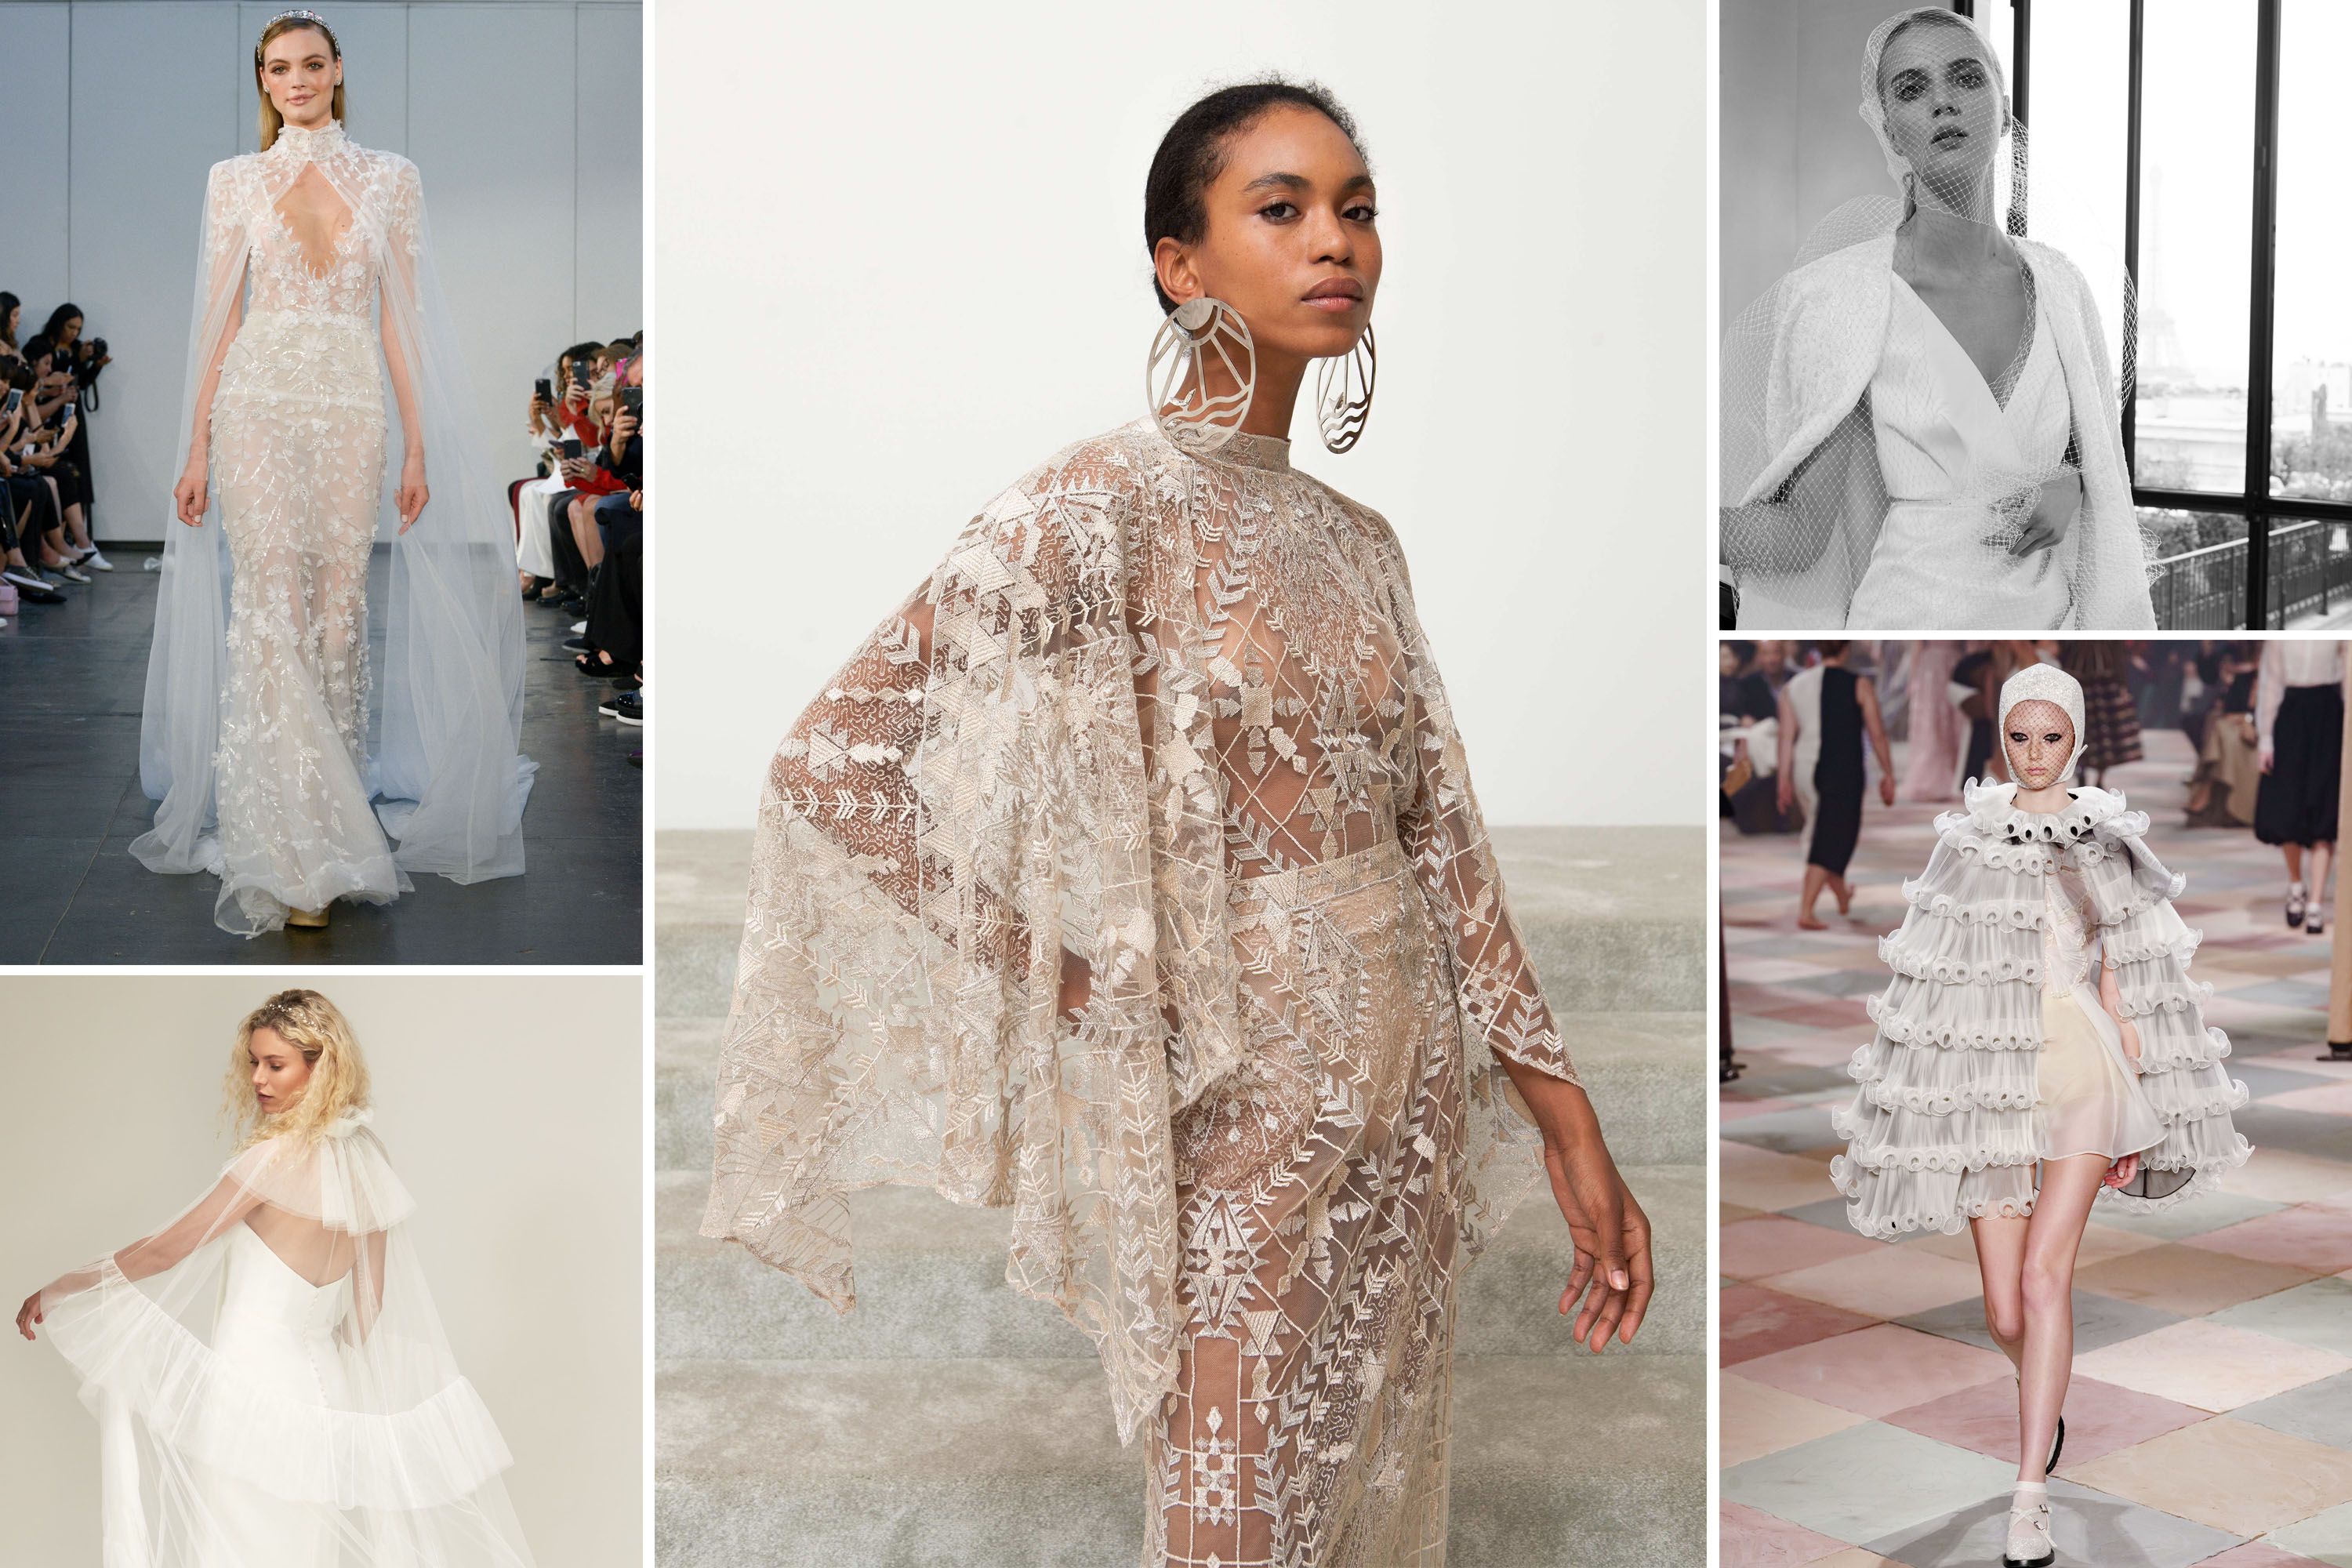 Wedding Dress Trends 2019 - The “It” Bridal Trends of 2019